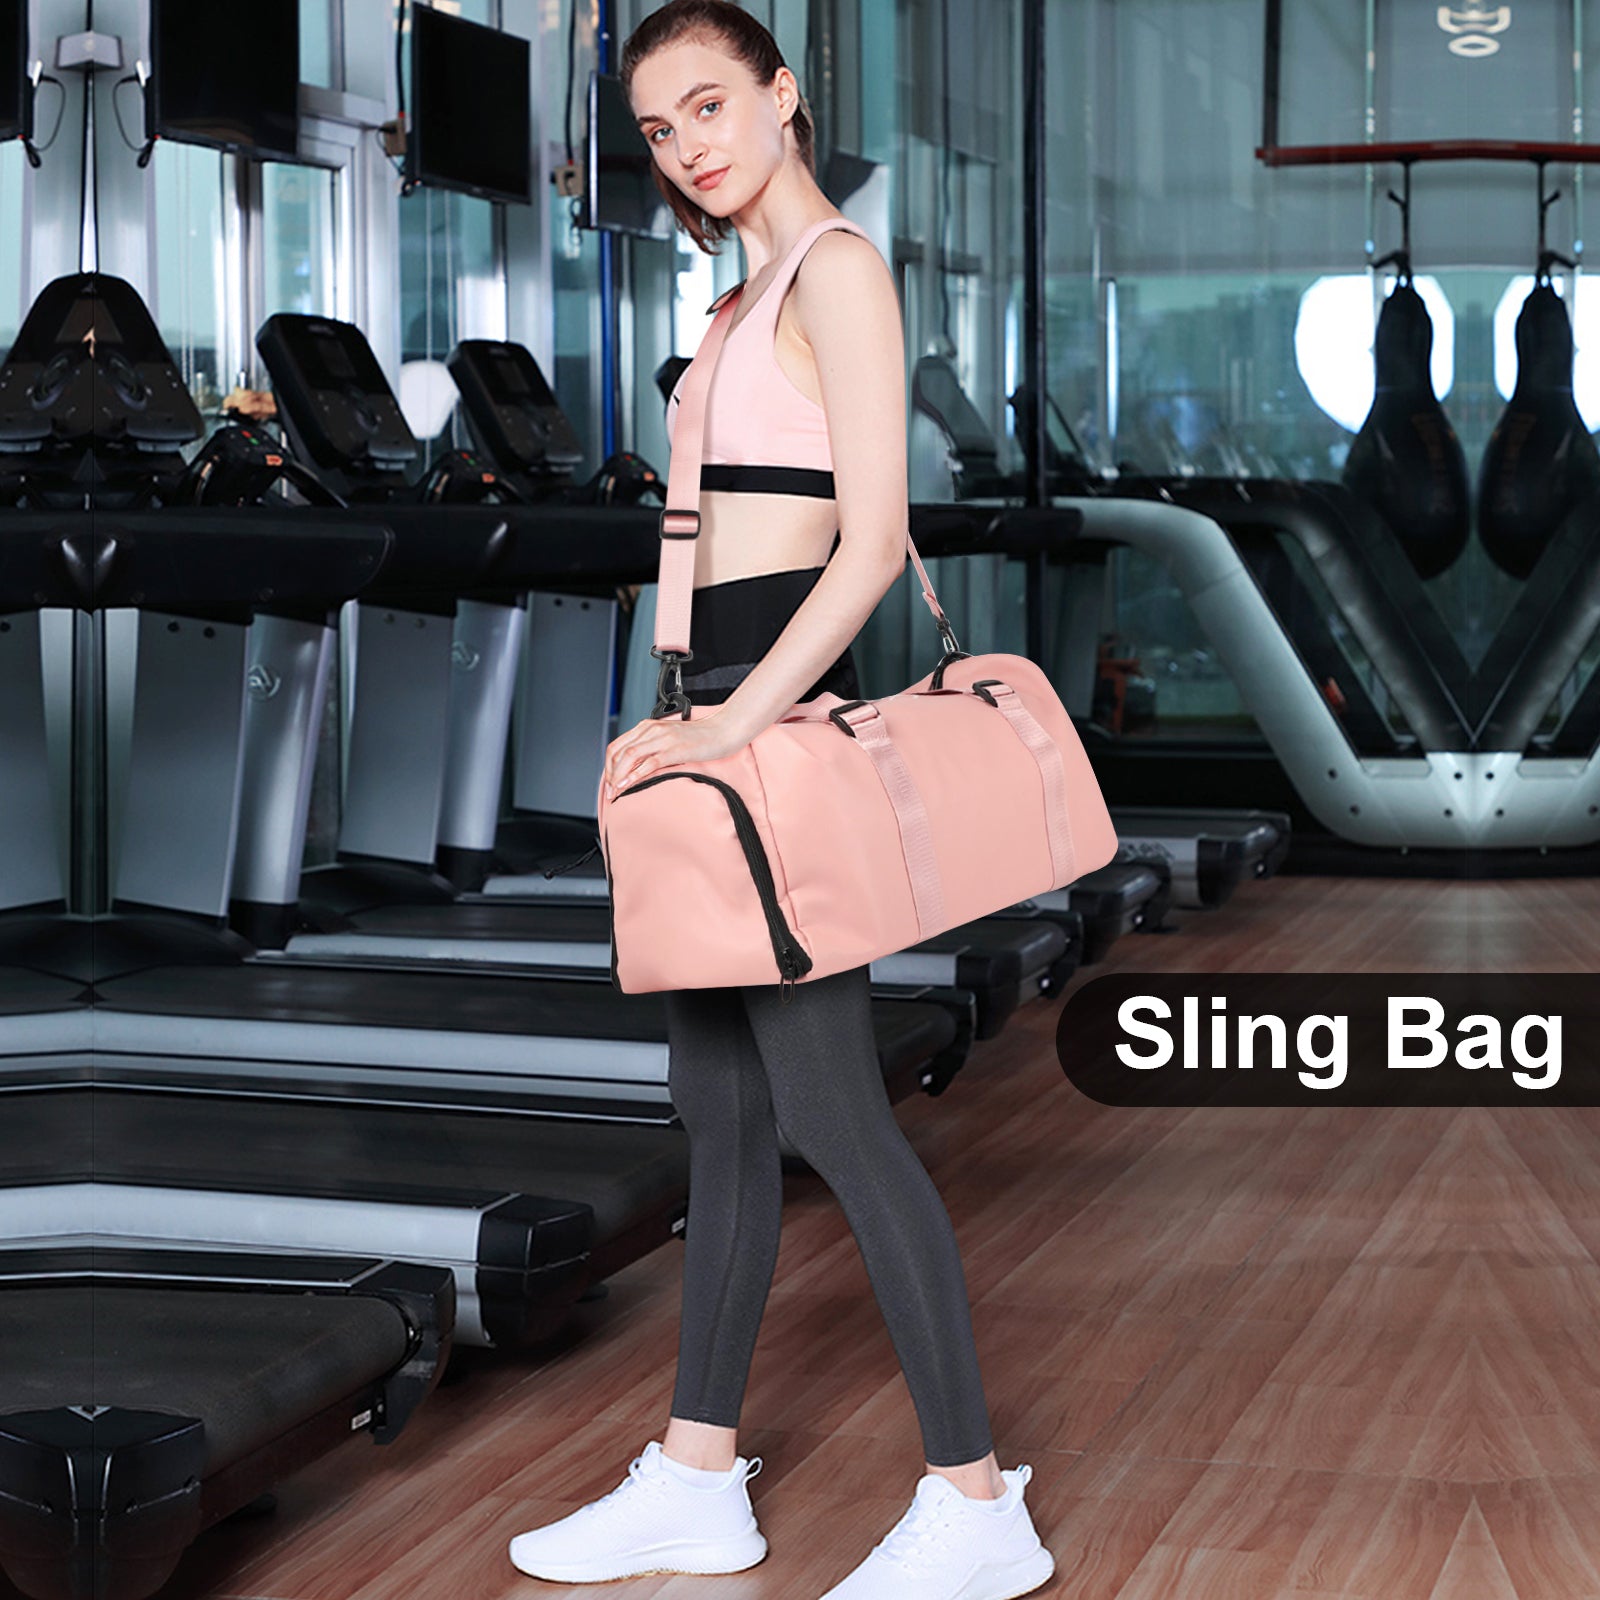 Gym Bag for Women and Men, Waterproof Duffel Bag Shoes Compartment, Lightweight Carry